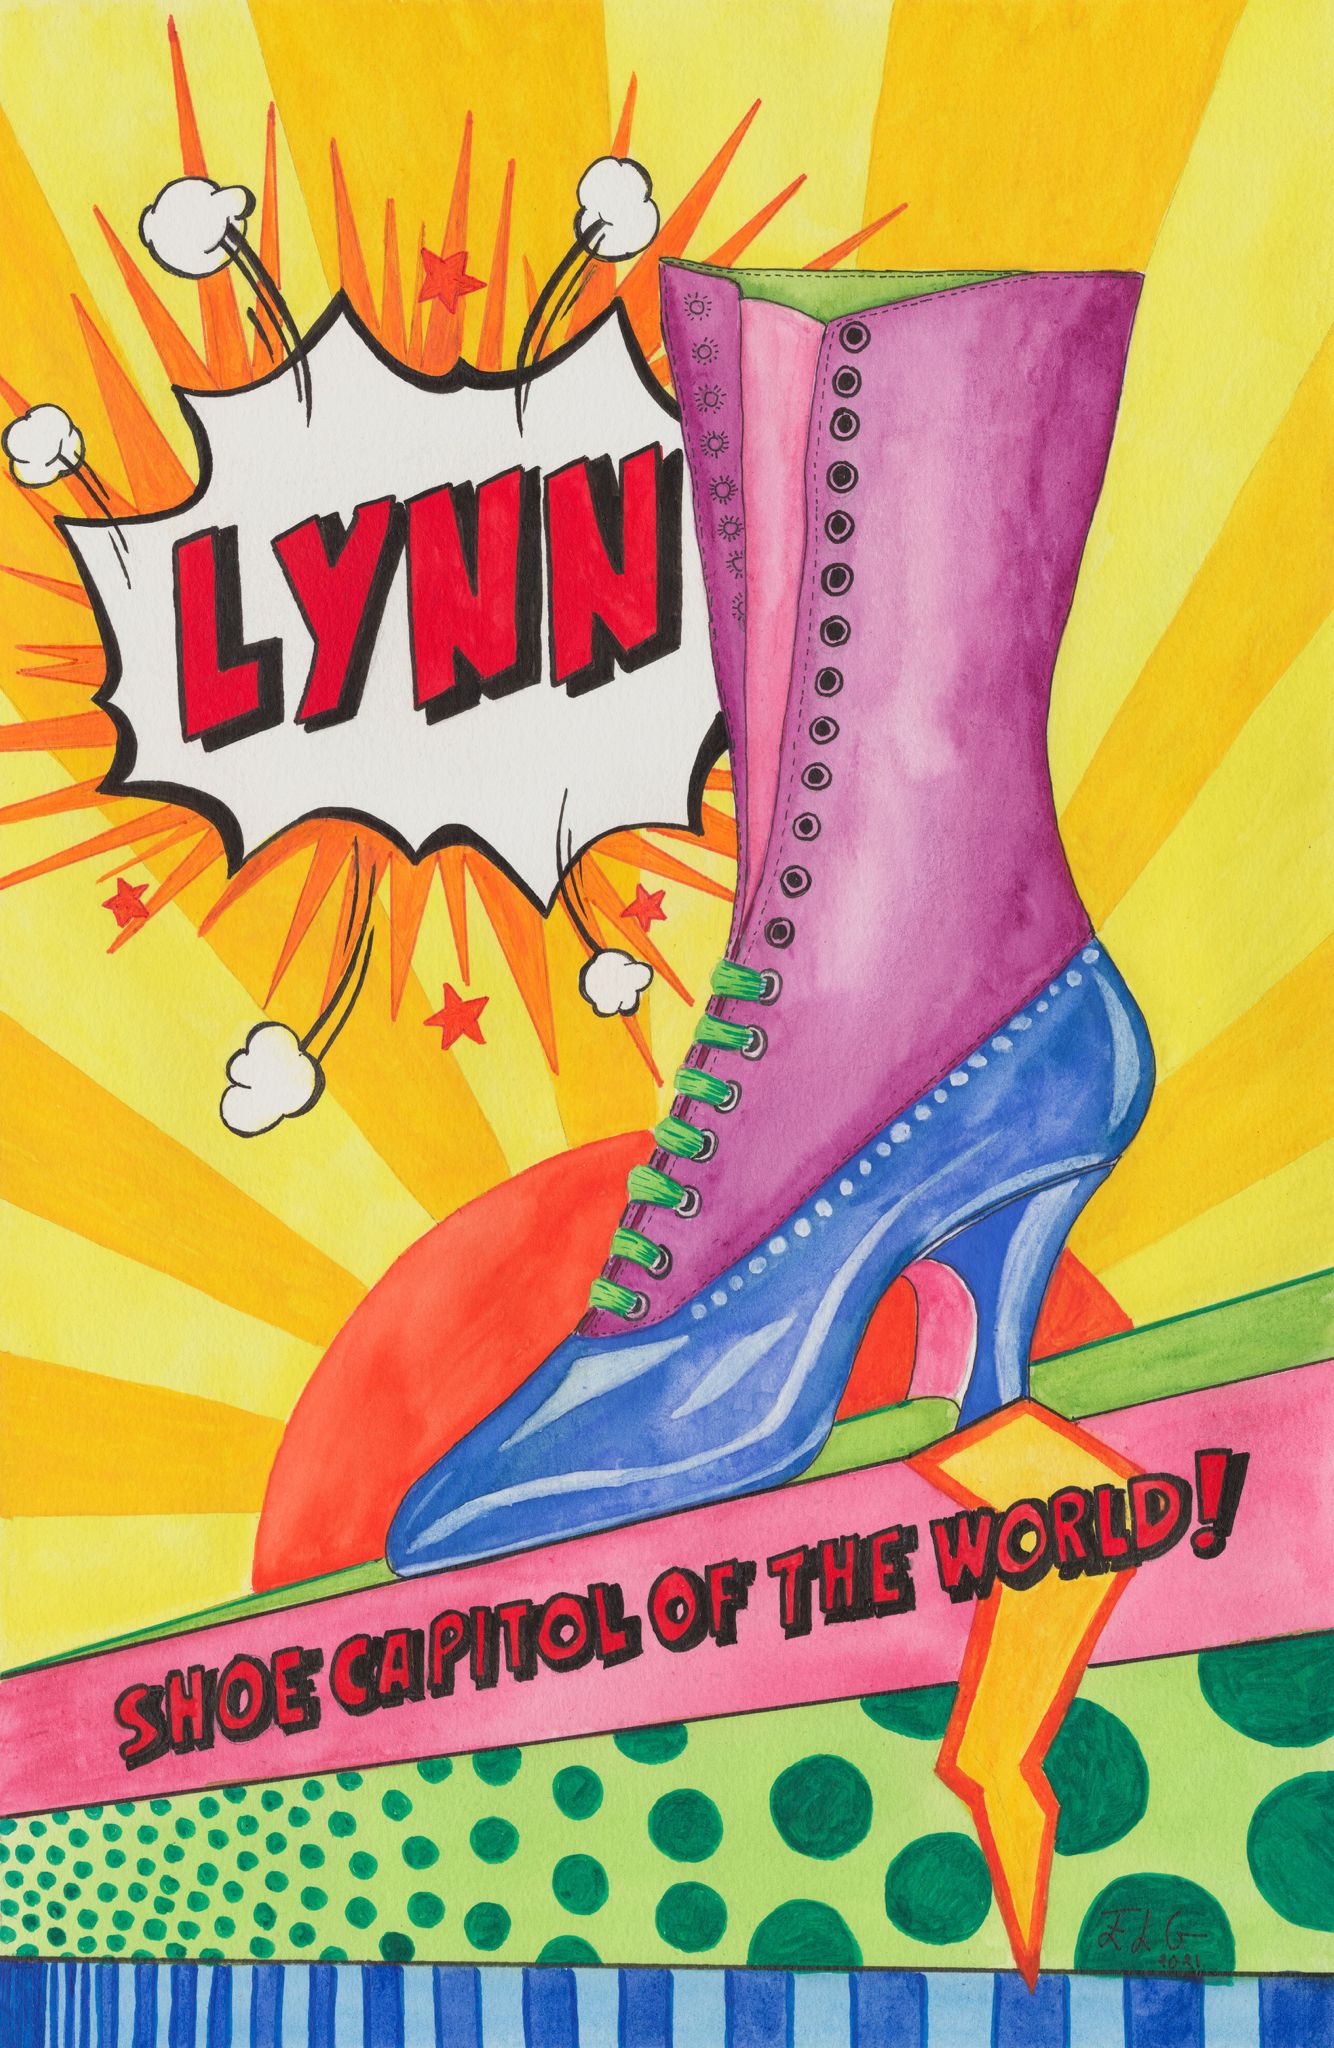 The cover of lynn's shoe center of the world.